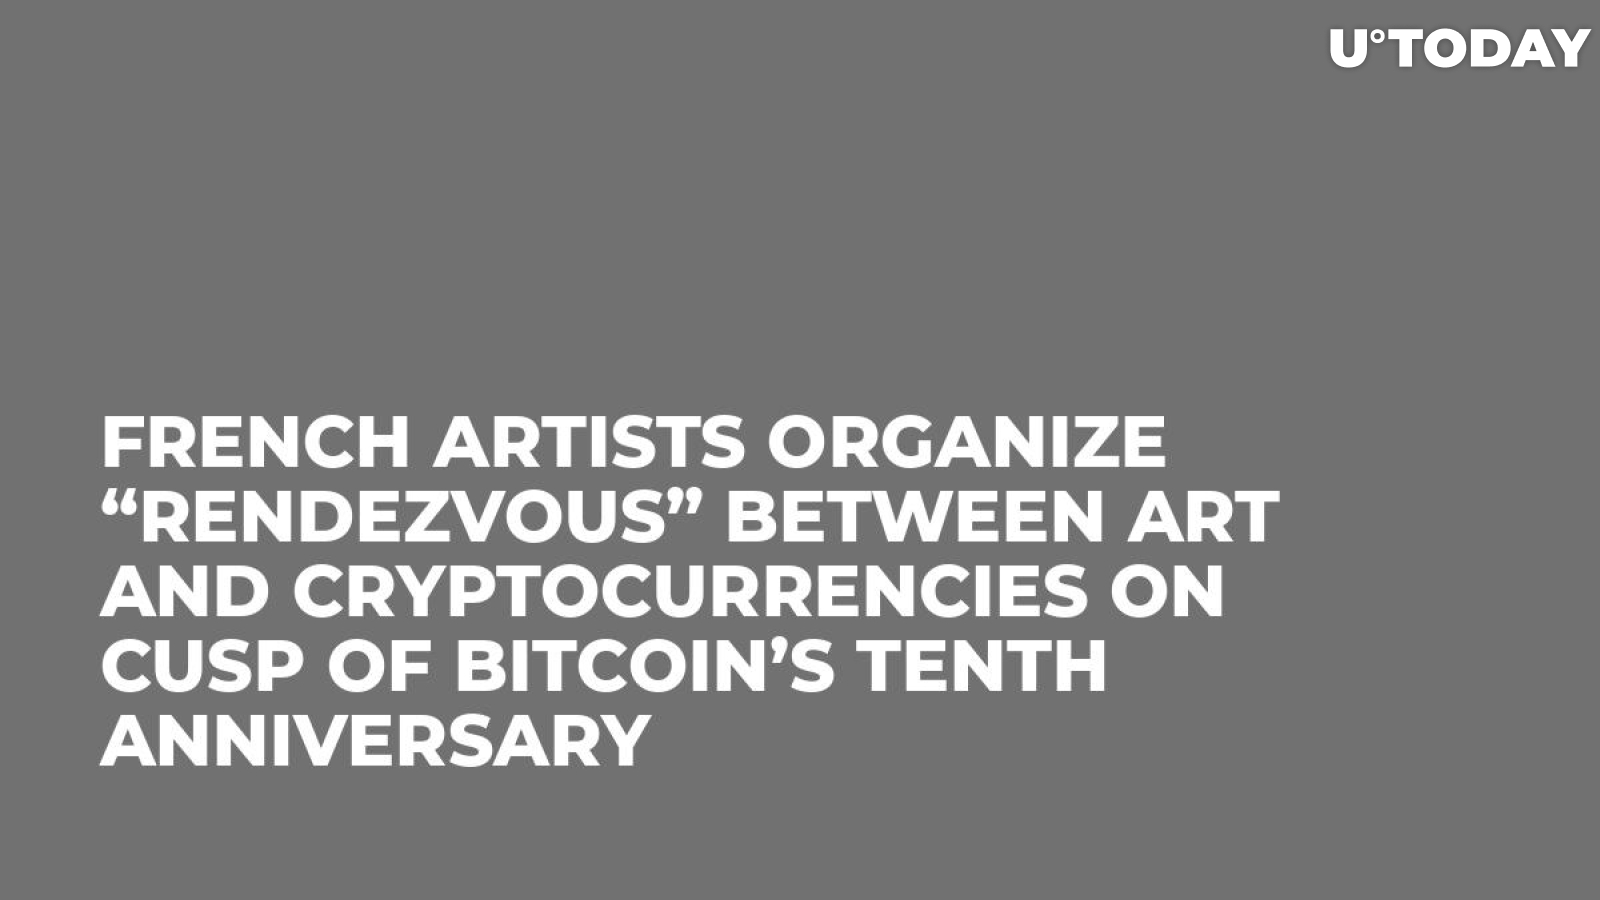 French Artists Organize “Rendezvous” Between Art and Cryptocurrencies on Cusp of Bitcoin’s Tenth Anniversary  